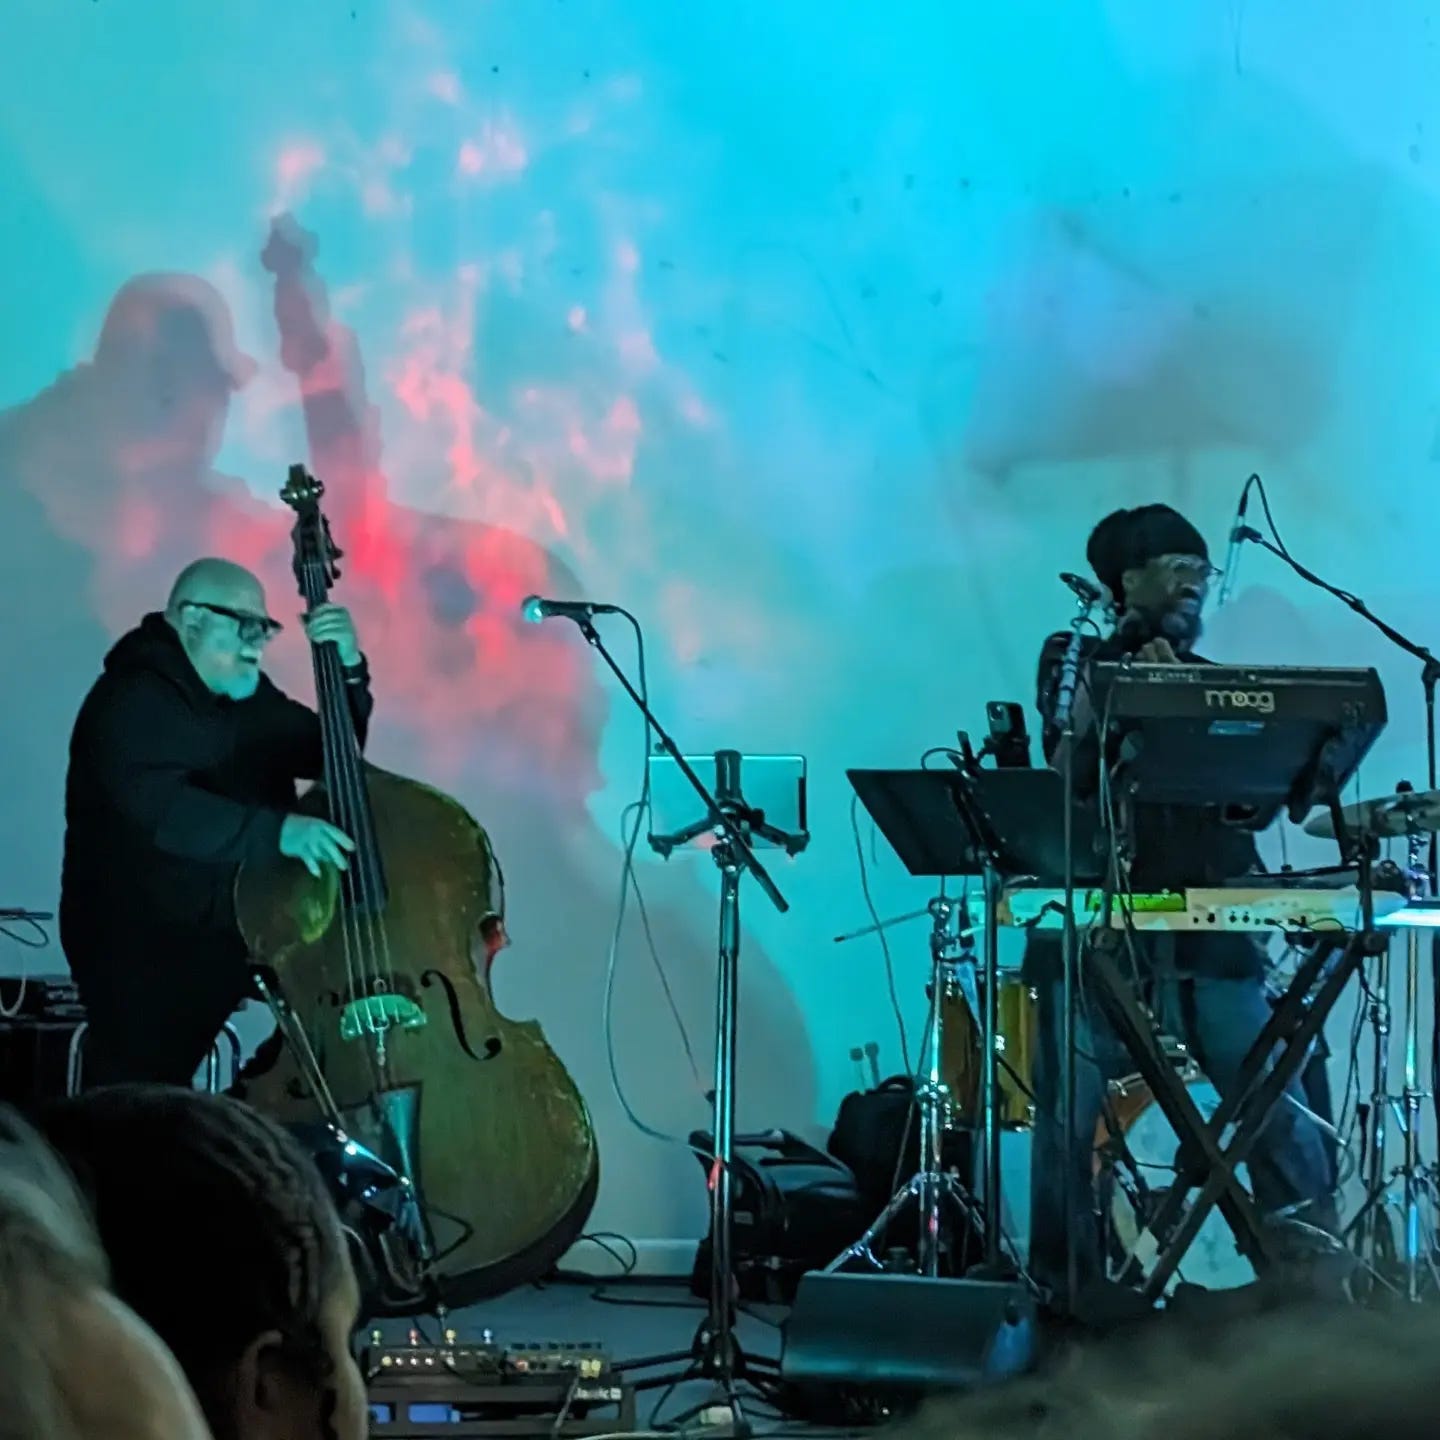 Phil Maneri playing upright bass, Jeffro Jam playing keys, drummer obscured, in front of blue and pink abstract projection